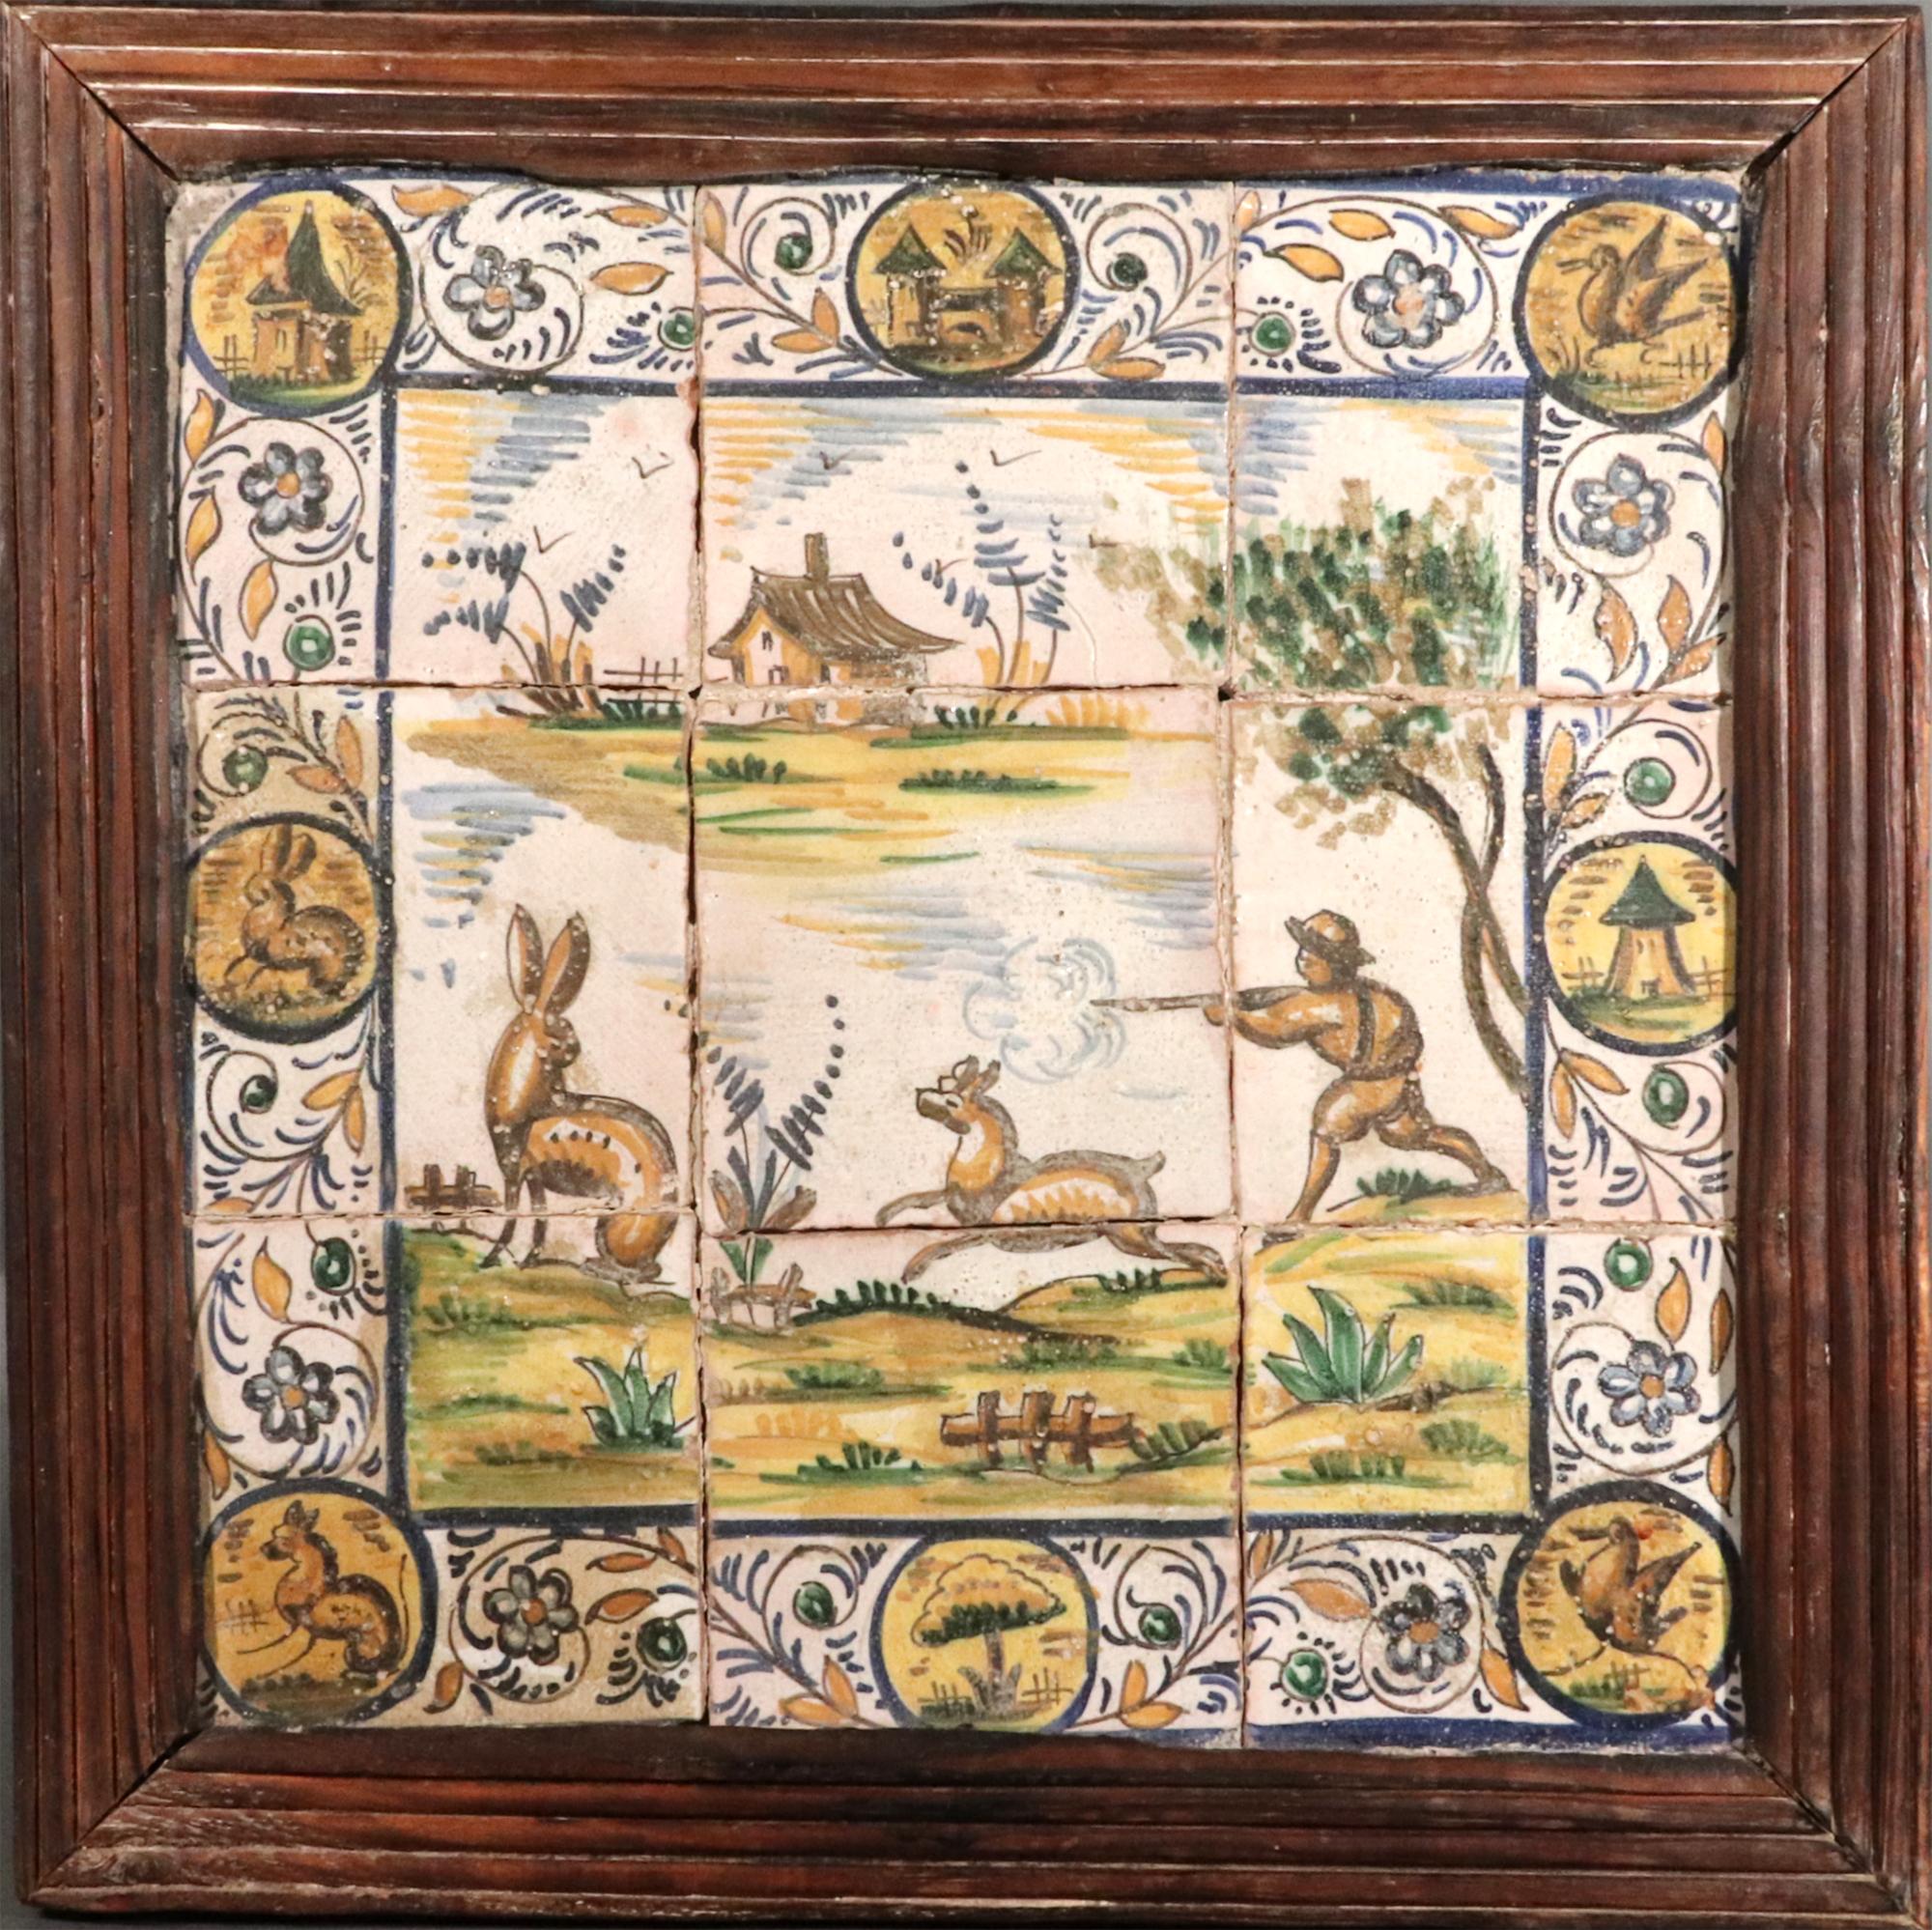 Spanish Catalan Faience Hunting Subject Tile Picture
Late 18th Century

The framed picture depicts a huntsman firing his gun at a hare with his dog before him in a landscape with a house in the background on a set of nine tiles.  The outer edge of